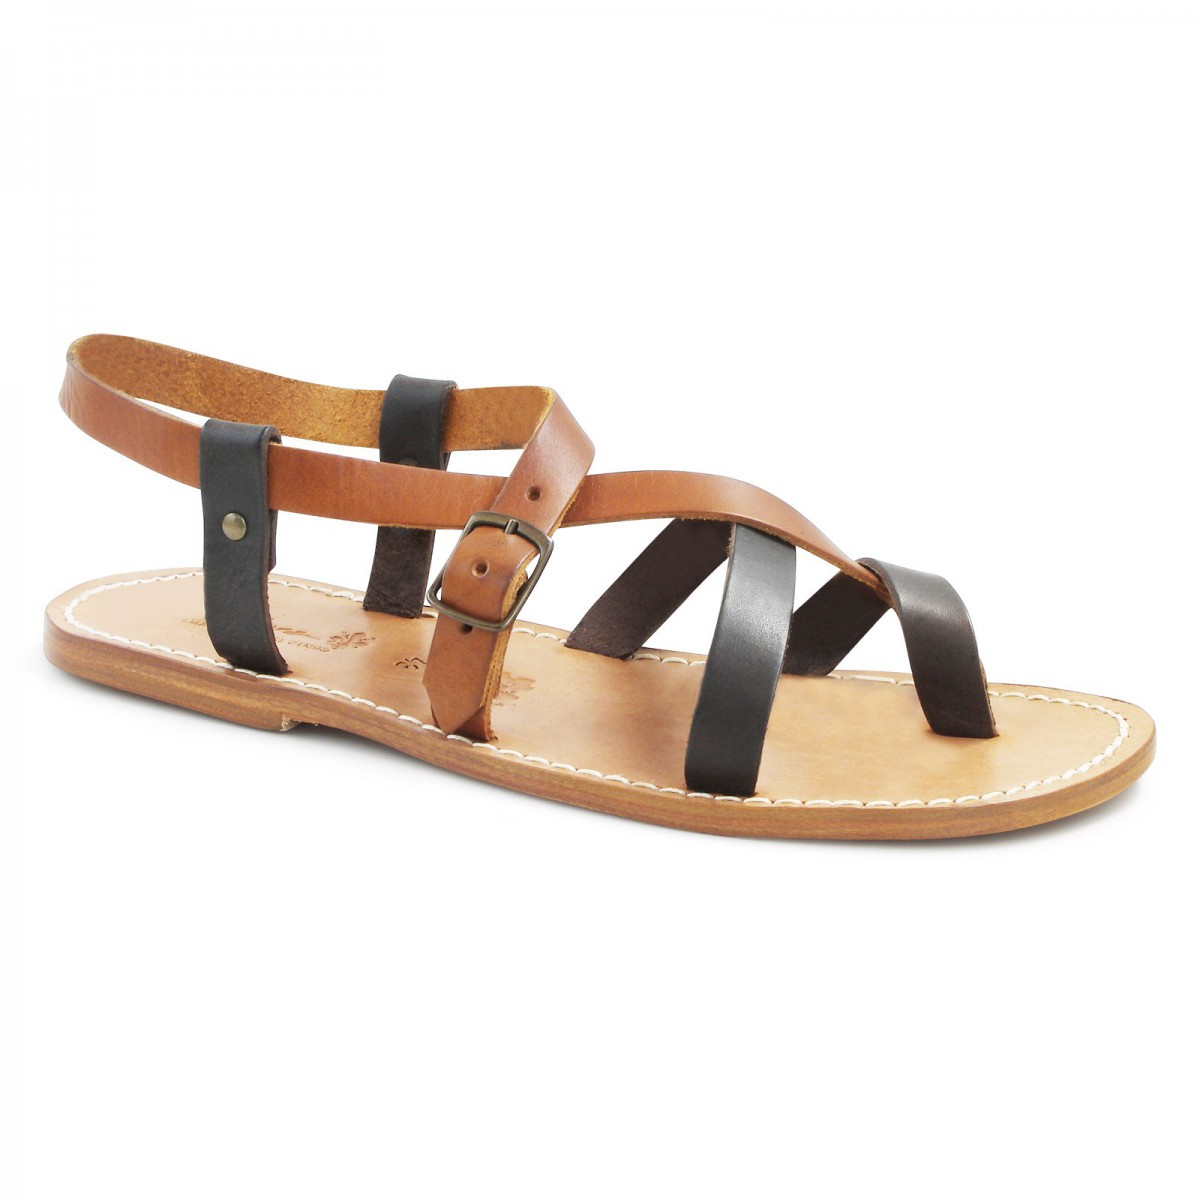 Jesus sandals handmade in genuine leather | Gianluca - The leather ...